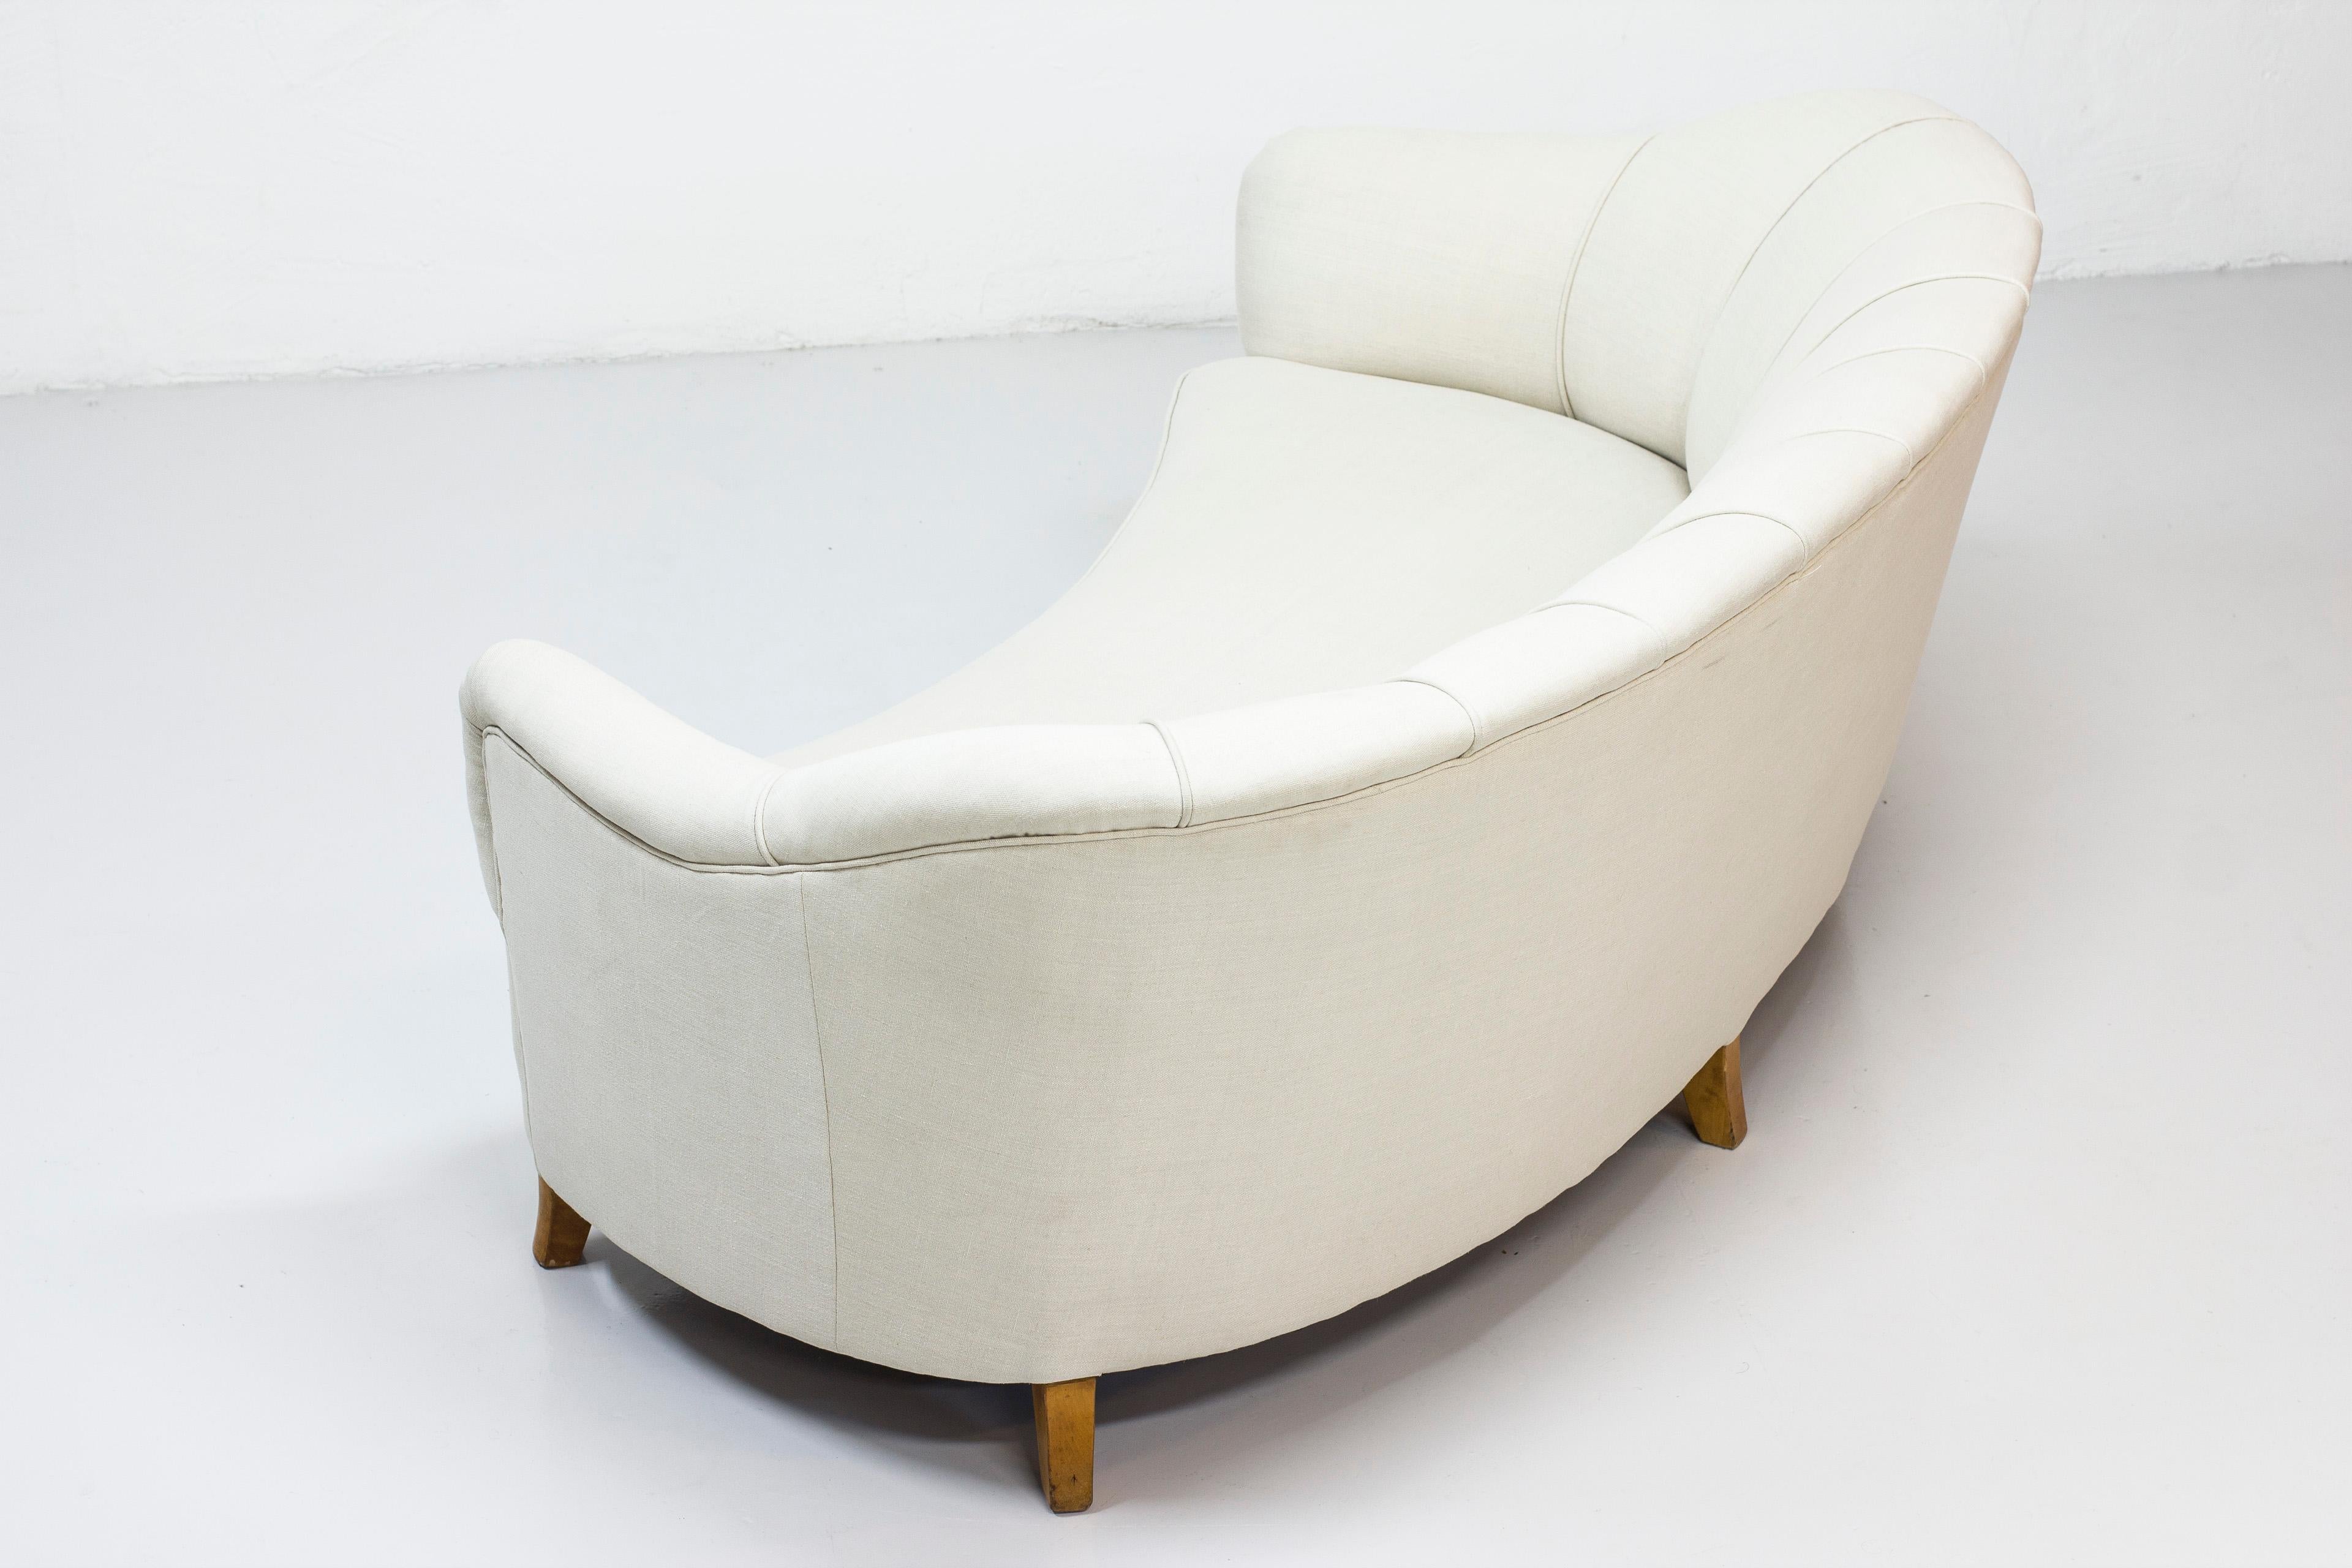 Scandinavian Modern Curved Art Deco Sofa Attributed to Otto Schulz and Boet, Sweden, 1930s